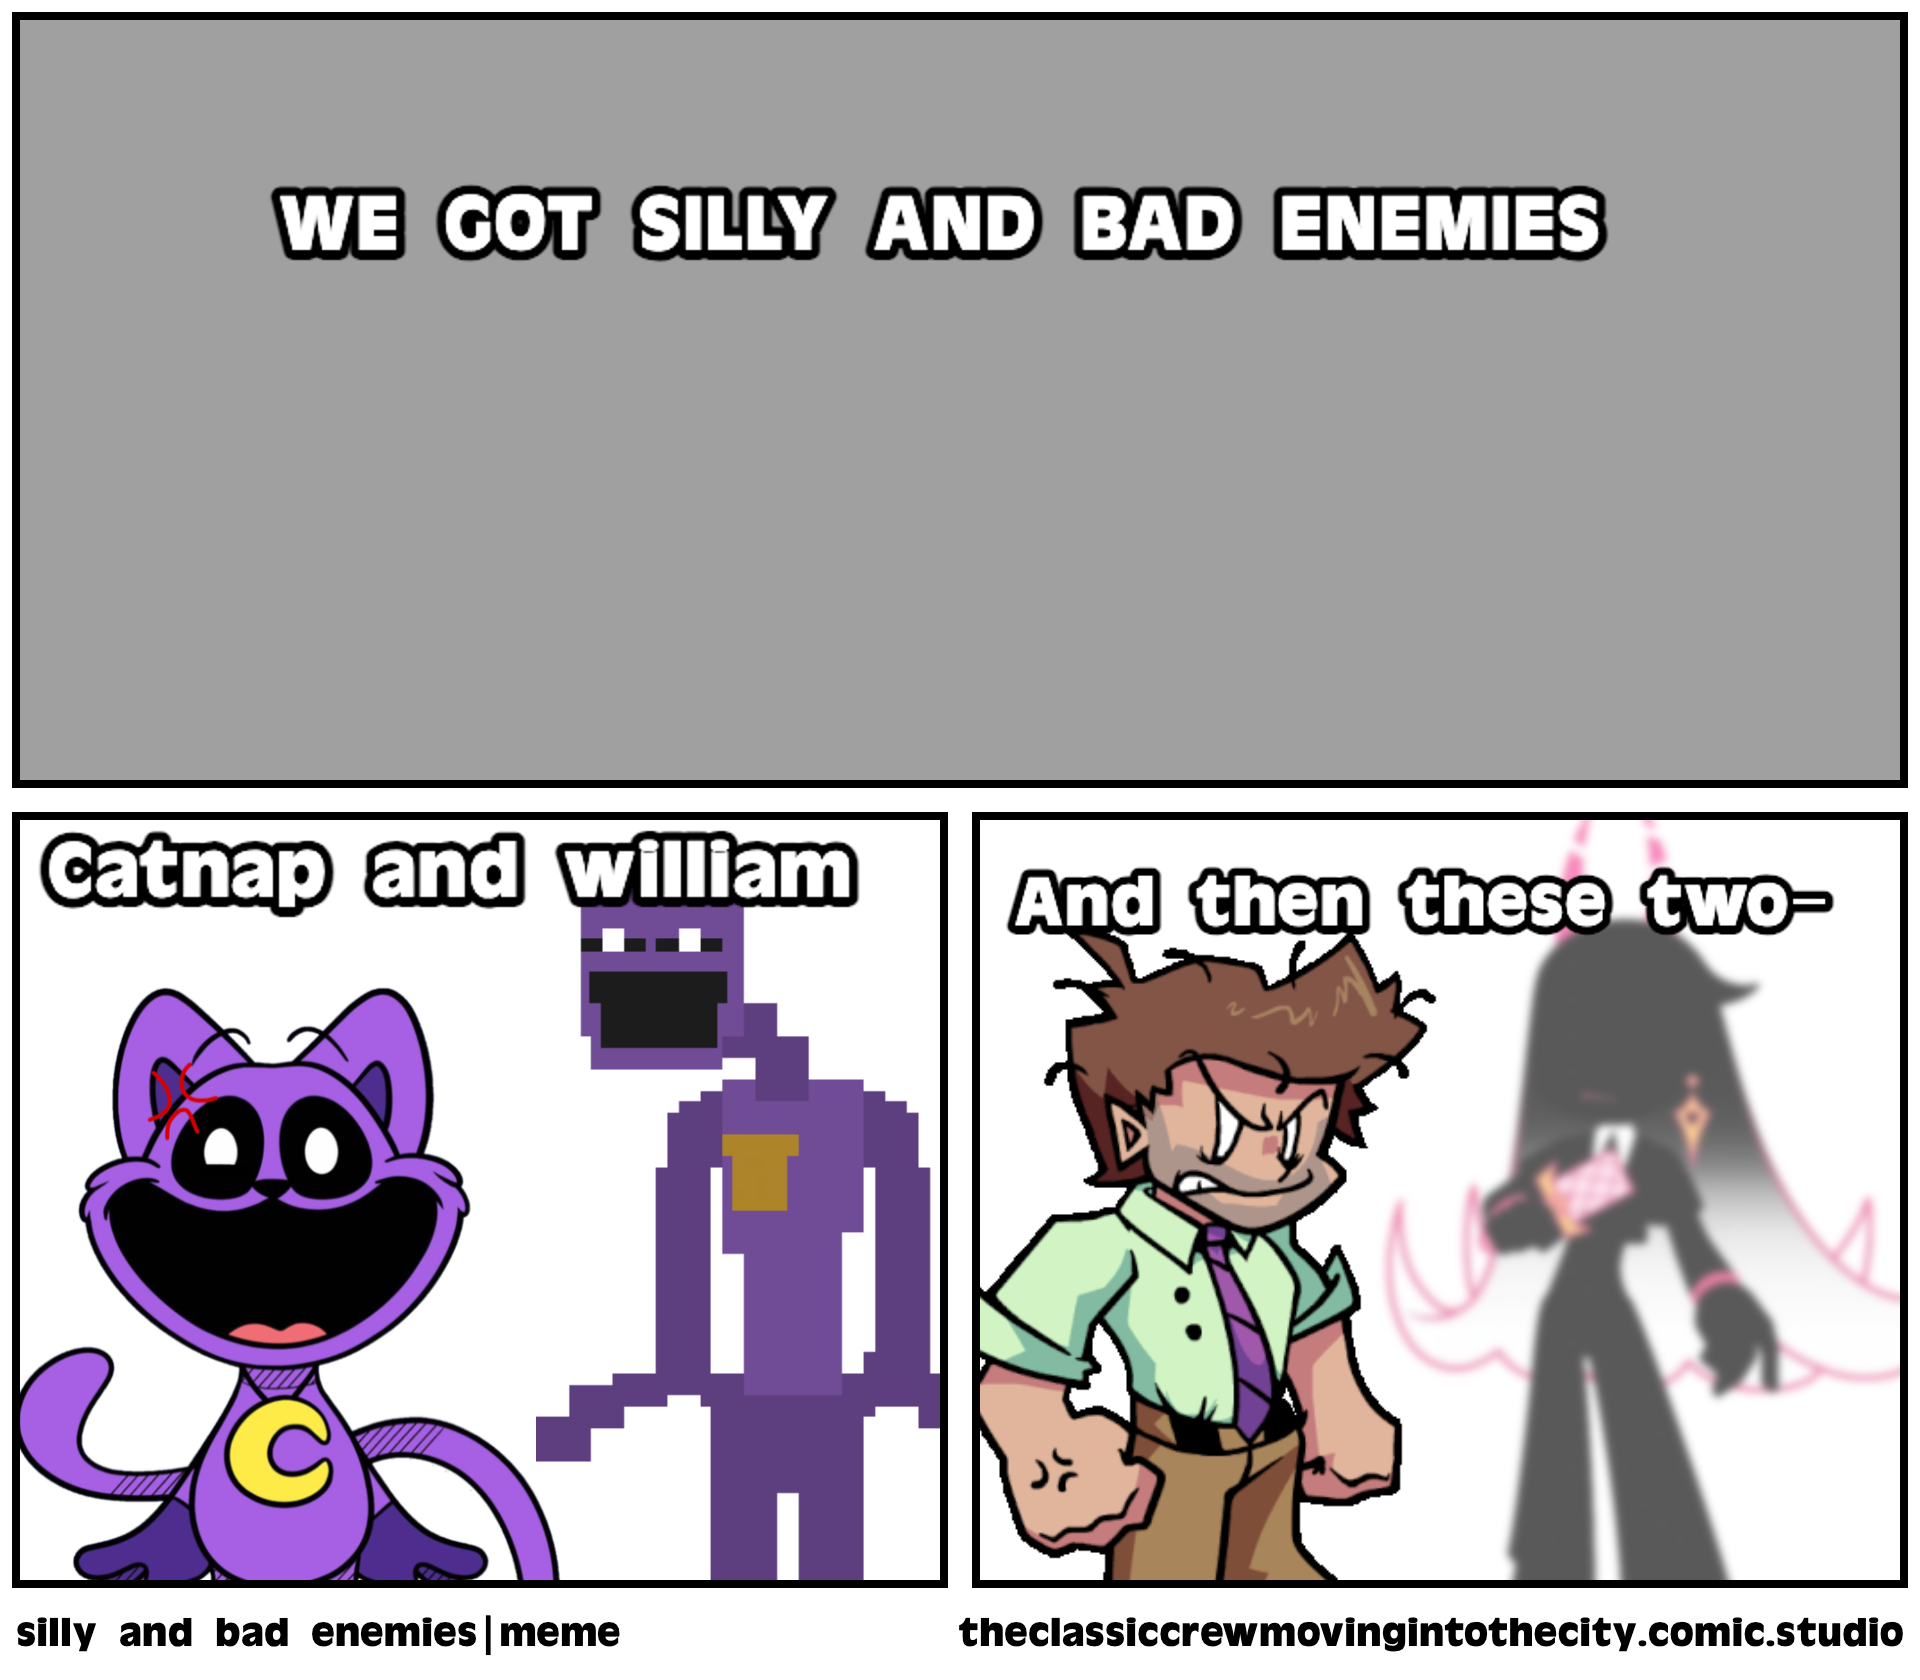 silly and bad enemies|meme